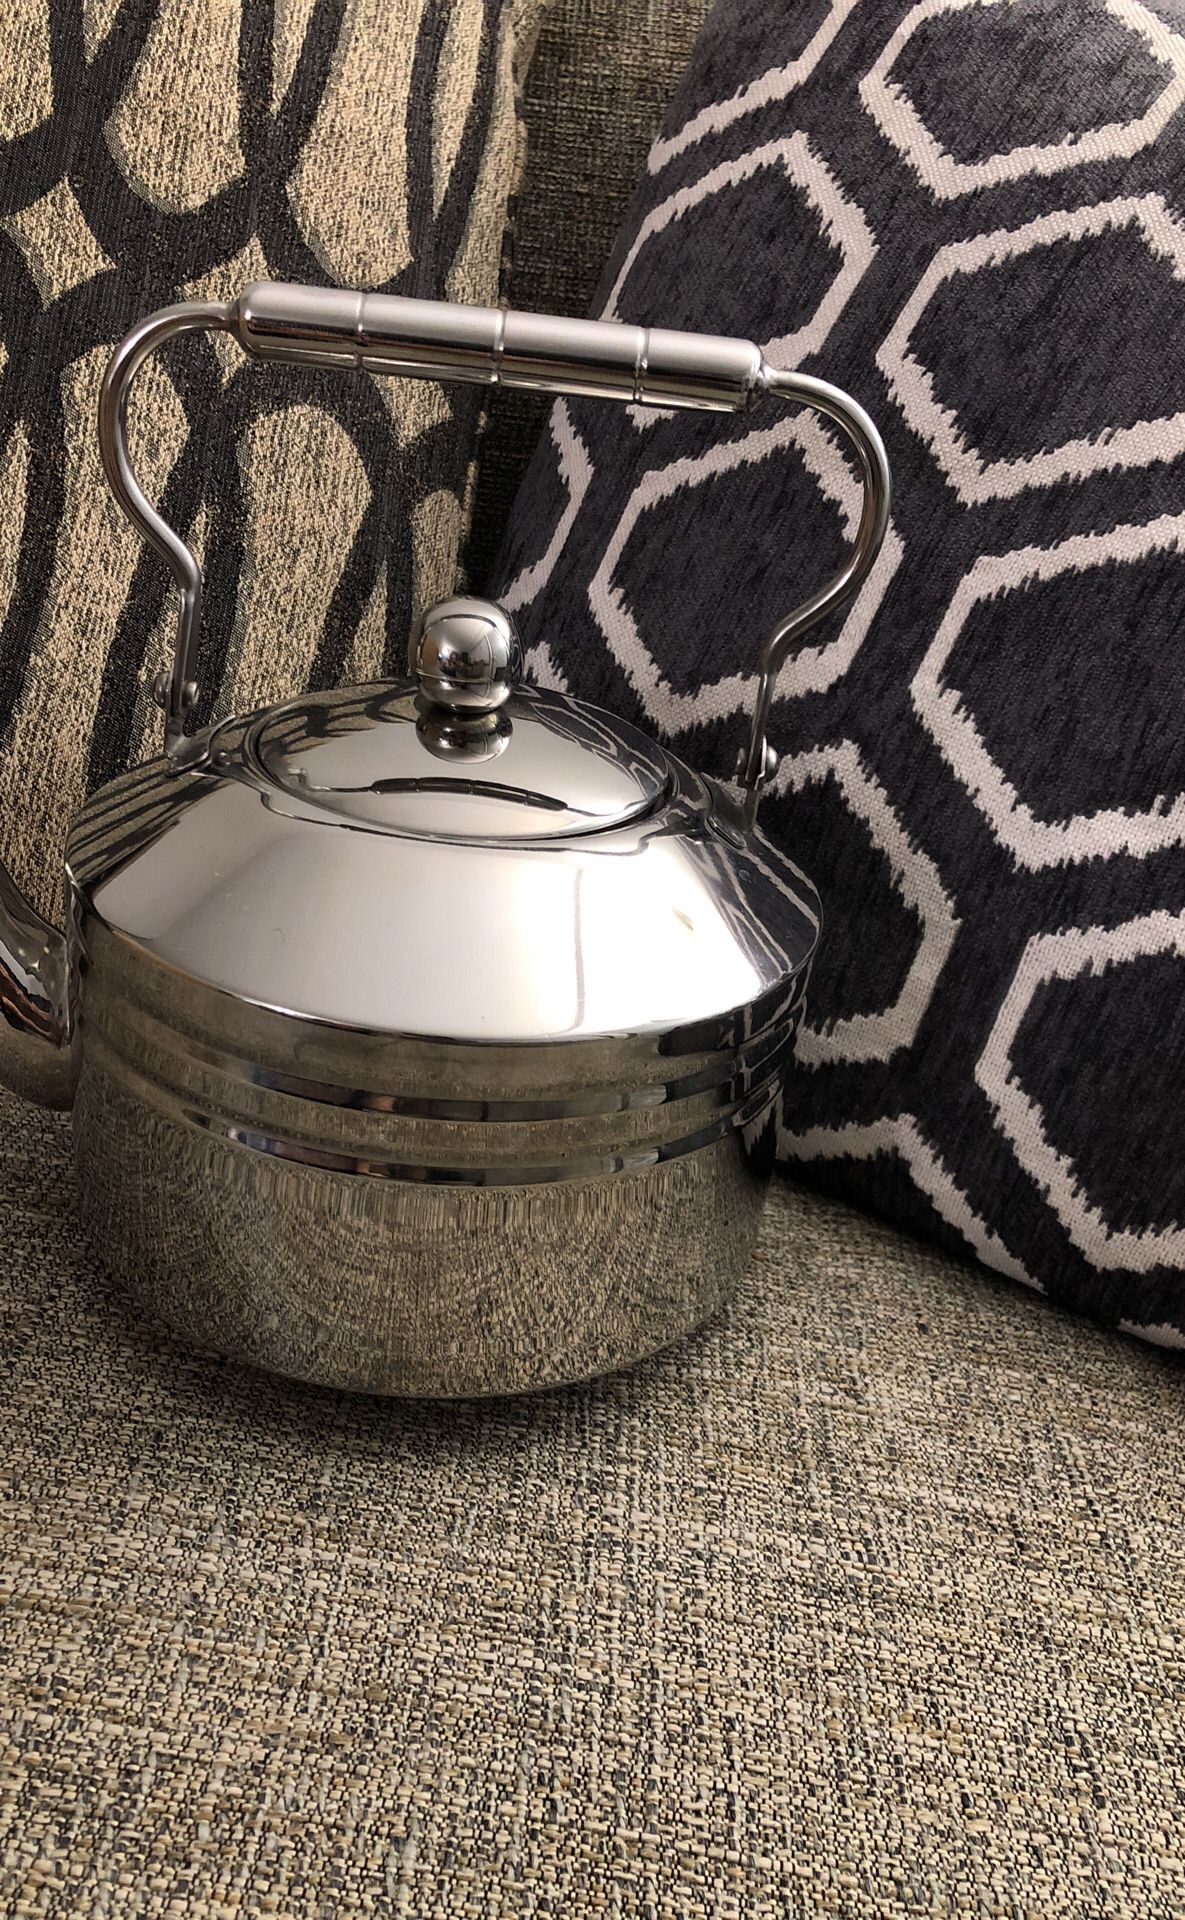 Stainless steel tea pot. Please see all the pictures and read the description